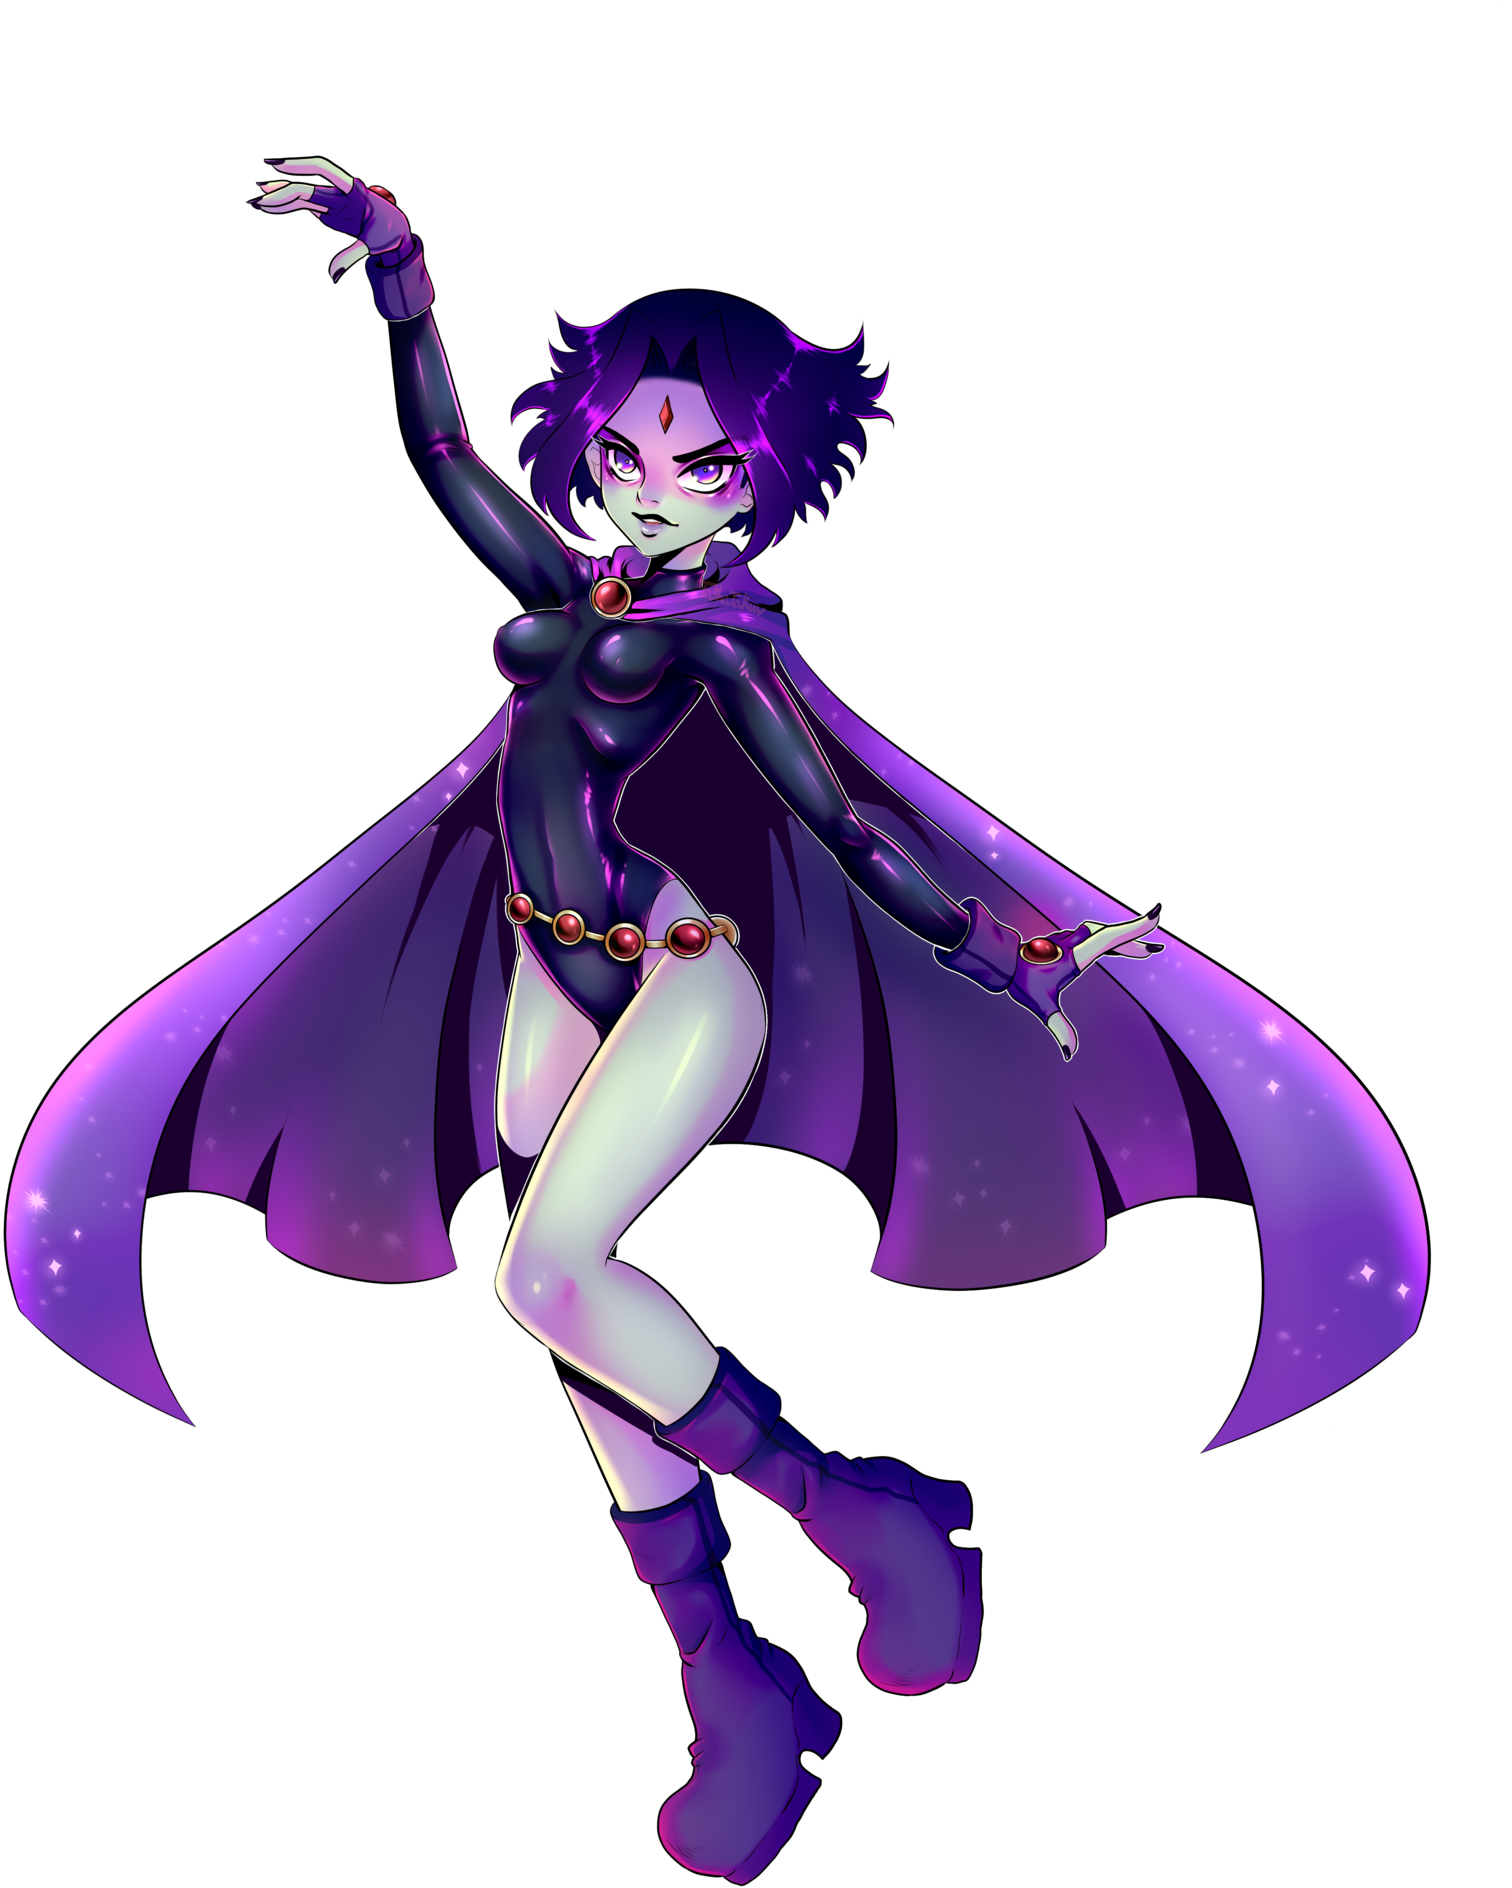 Purple Caped Anime Character